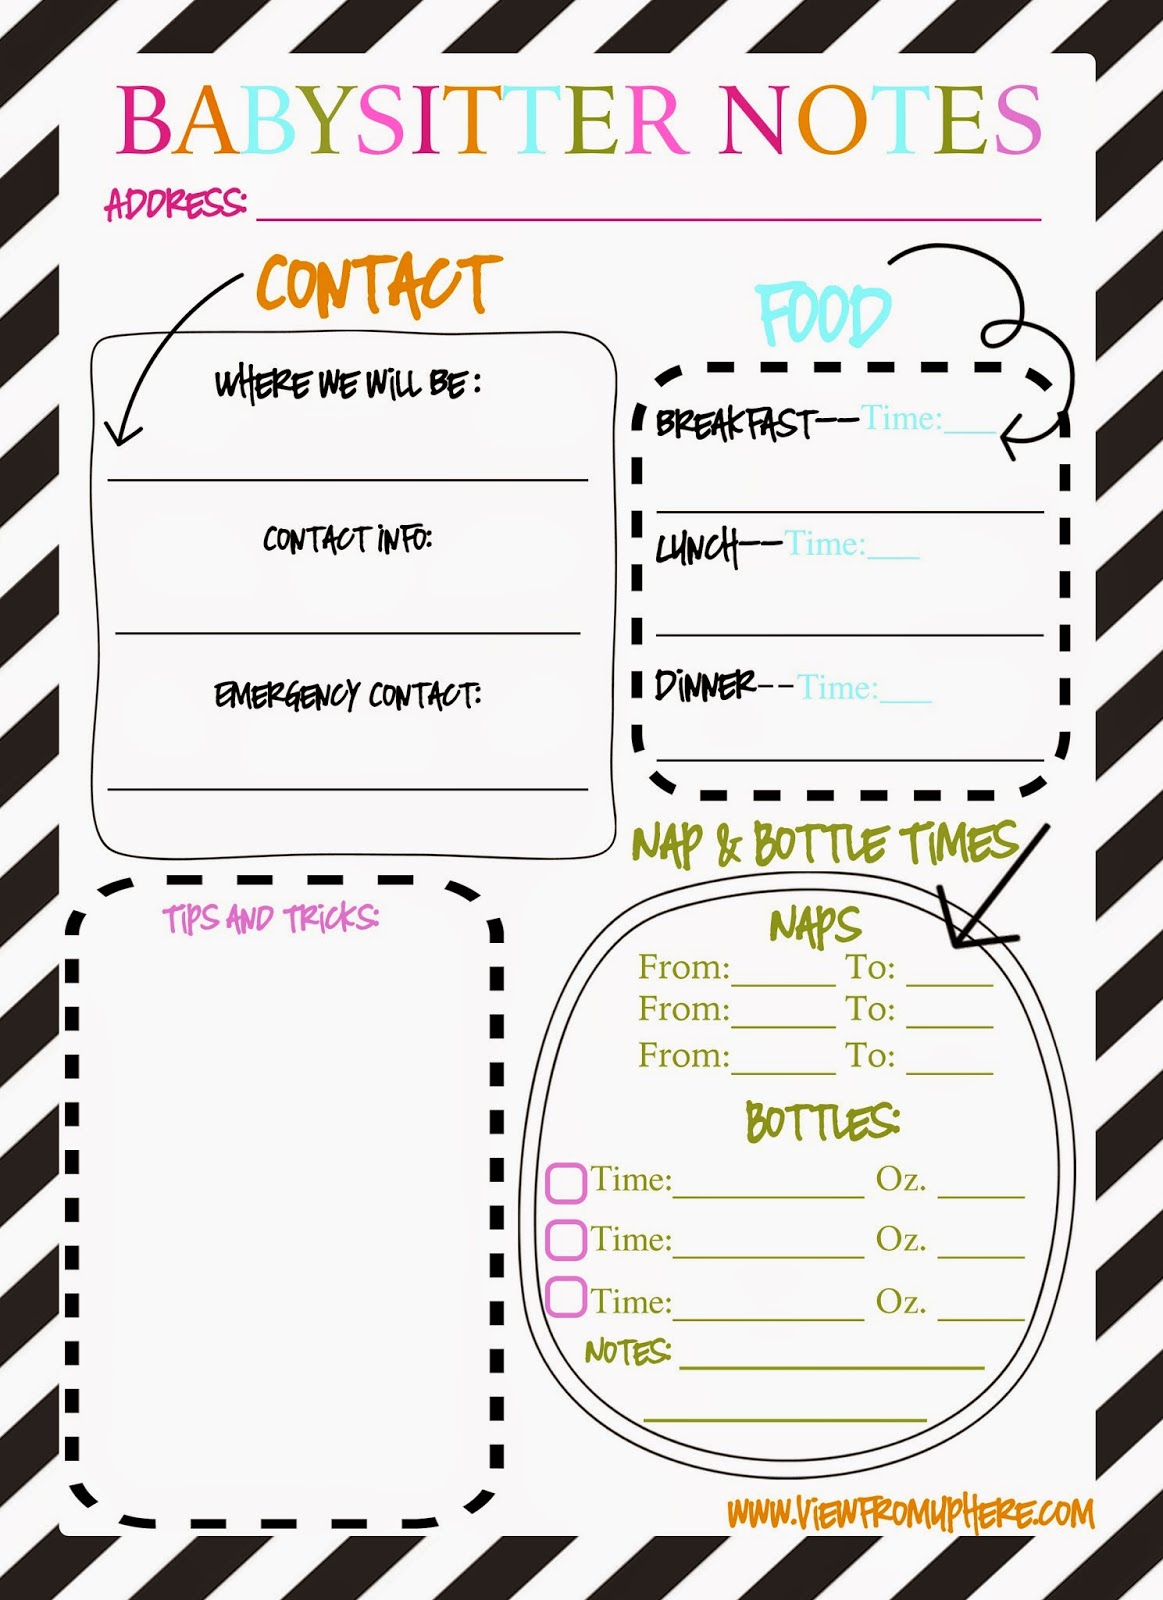 Babysitter Notes Free Printable - High Resolution Printable Intended For Nanny Notes Template